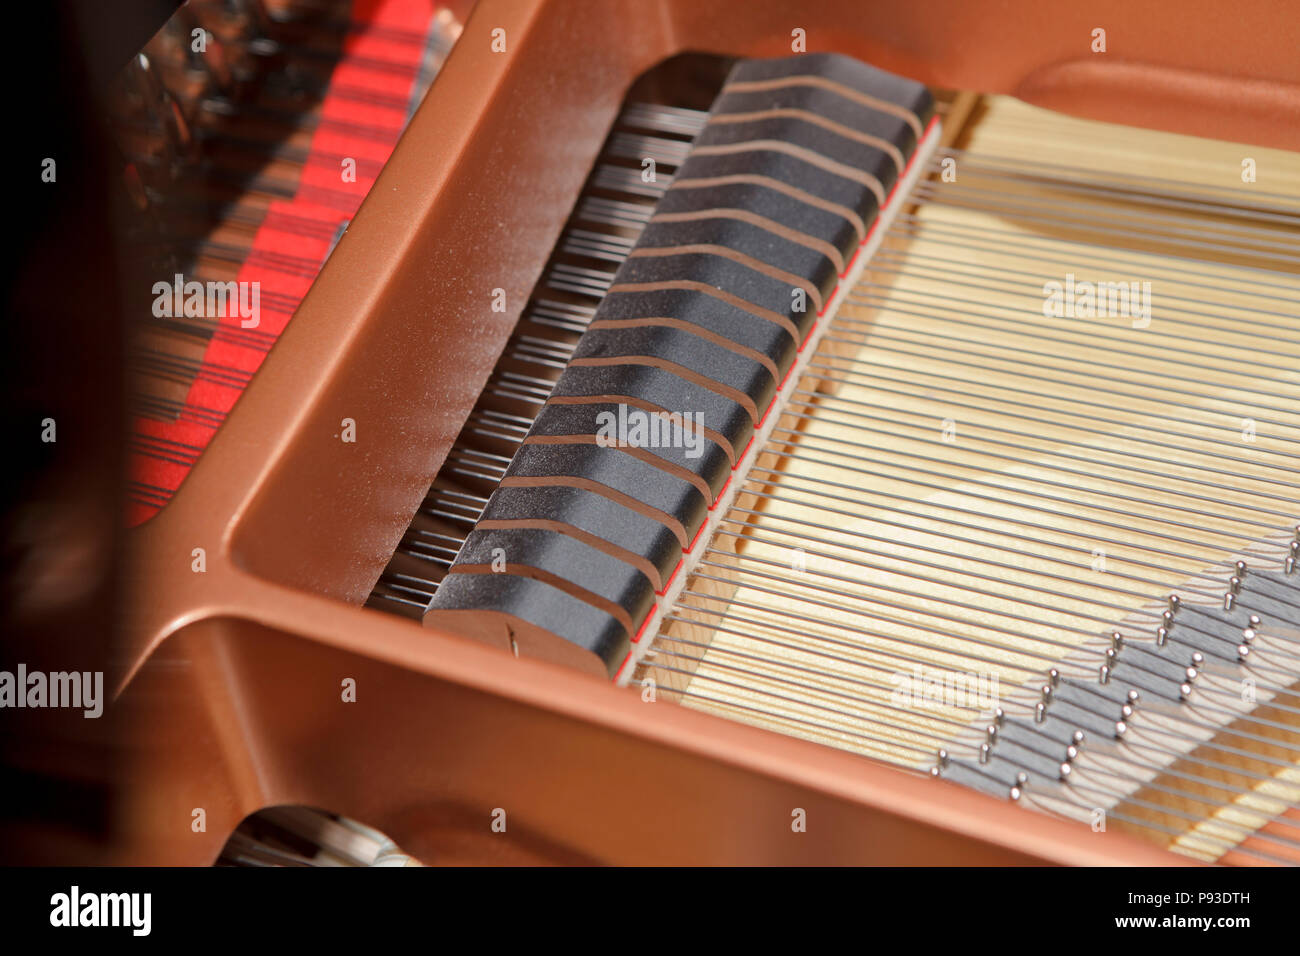 strings inside a piano, close up Stock Photo